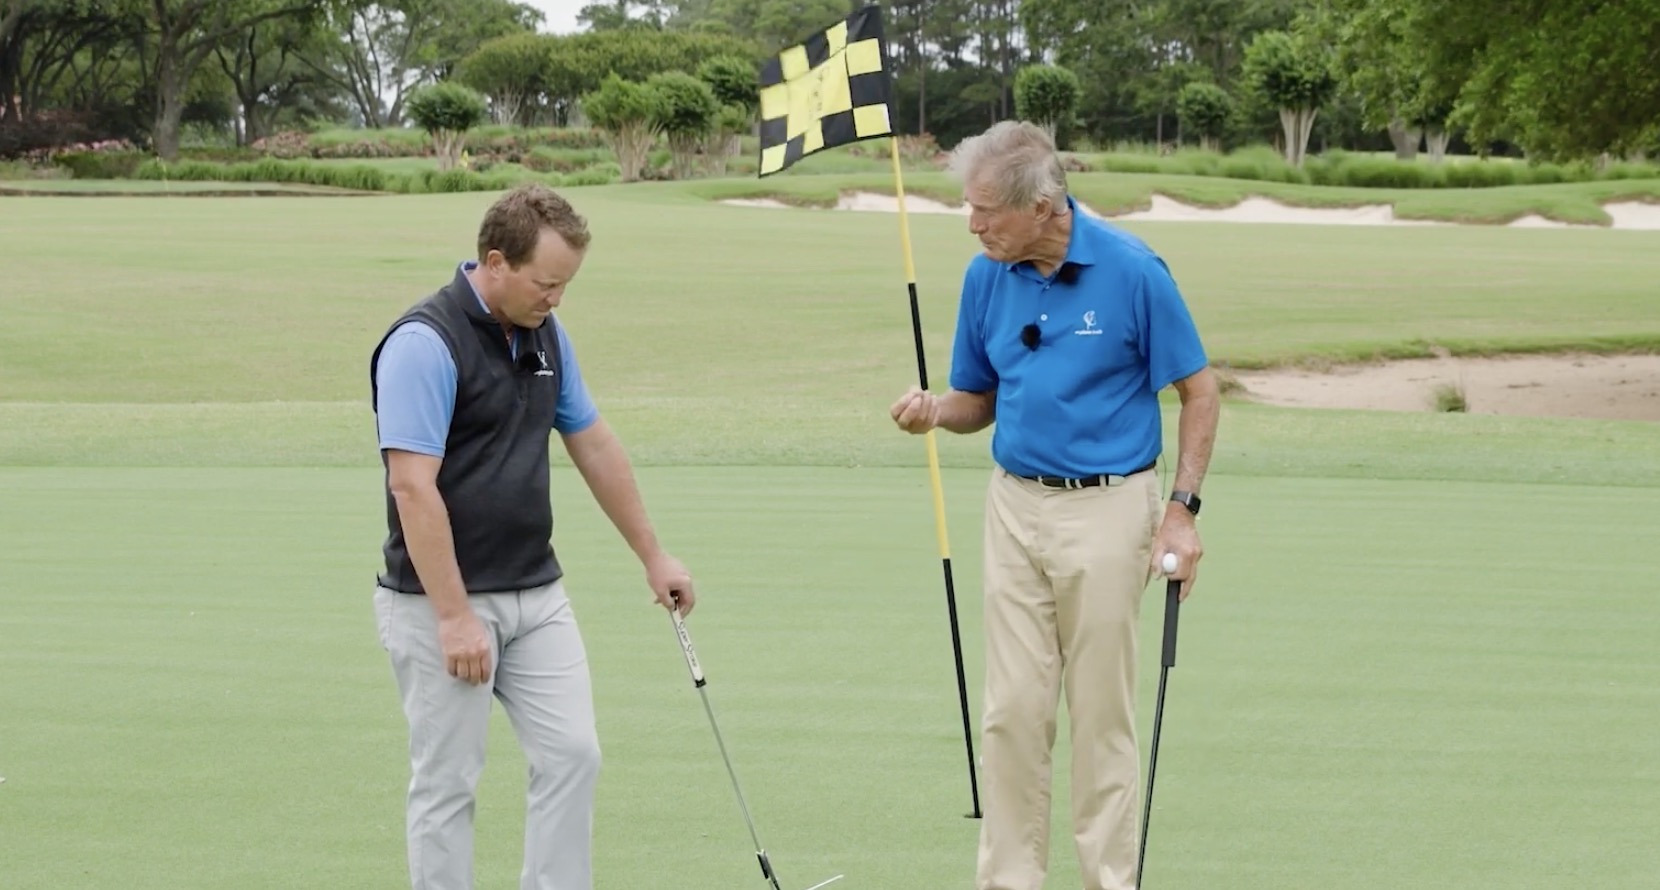 The Short Game: Putting 101